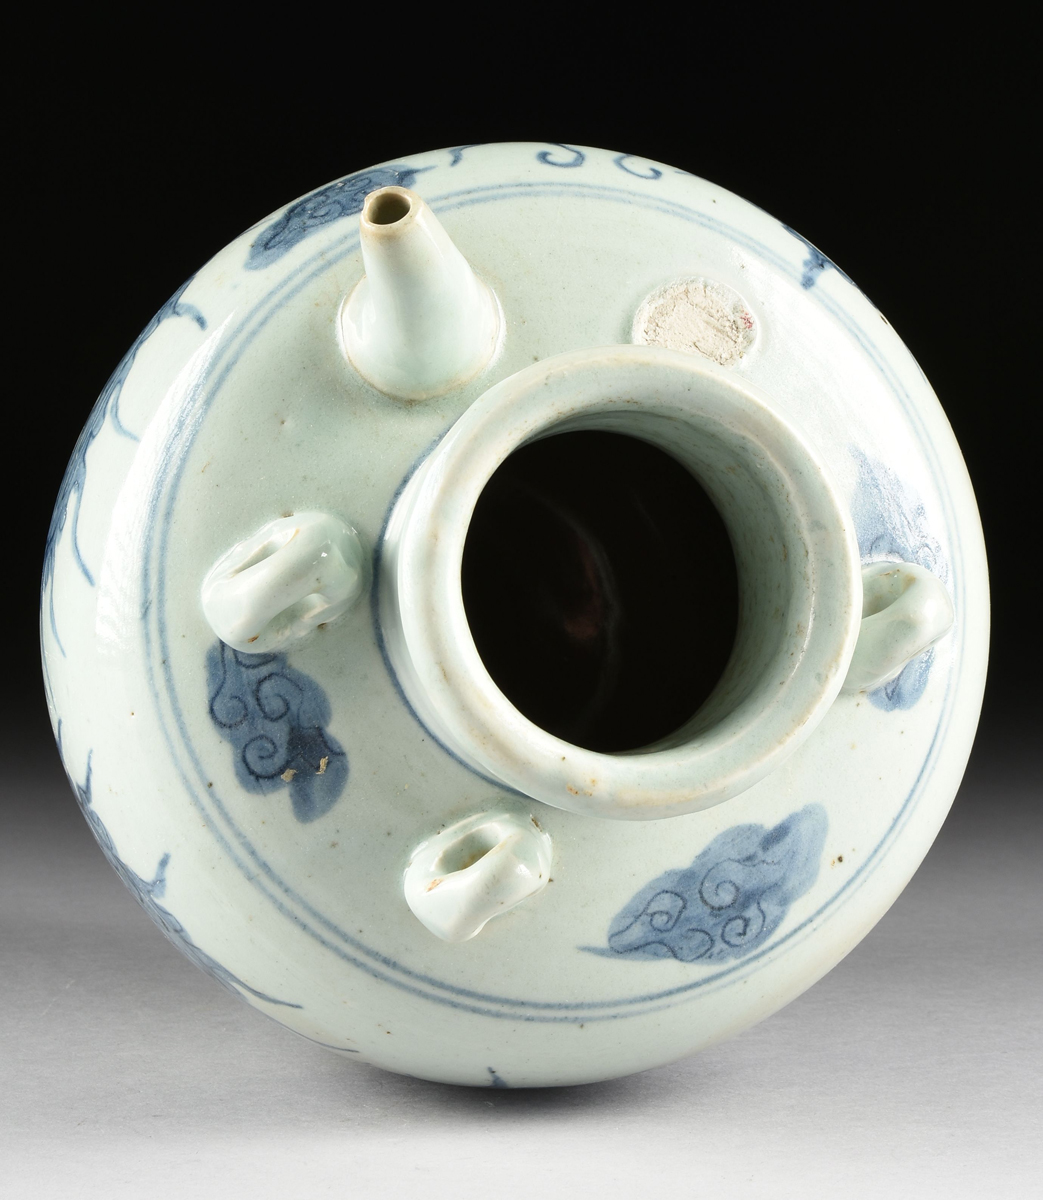 A CHINESE EXPORT BLUE AND WHITE DOUBLE HANDLED WINE/WATER JUG, LATE QING DYNASTY STYLE, the circular - Image 9 of 11